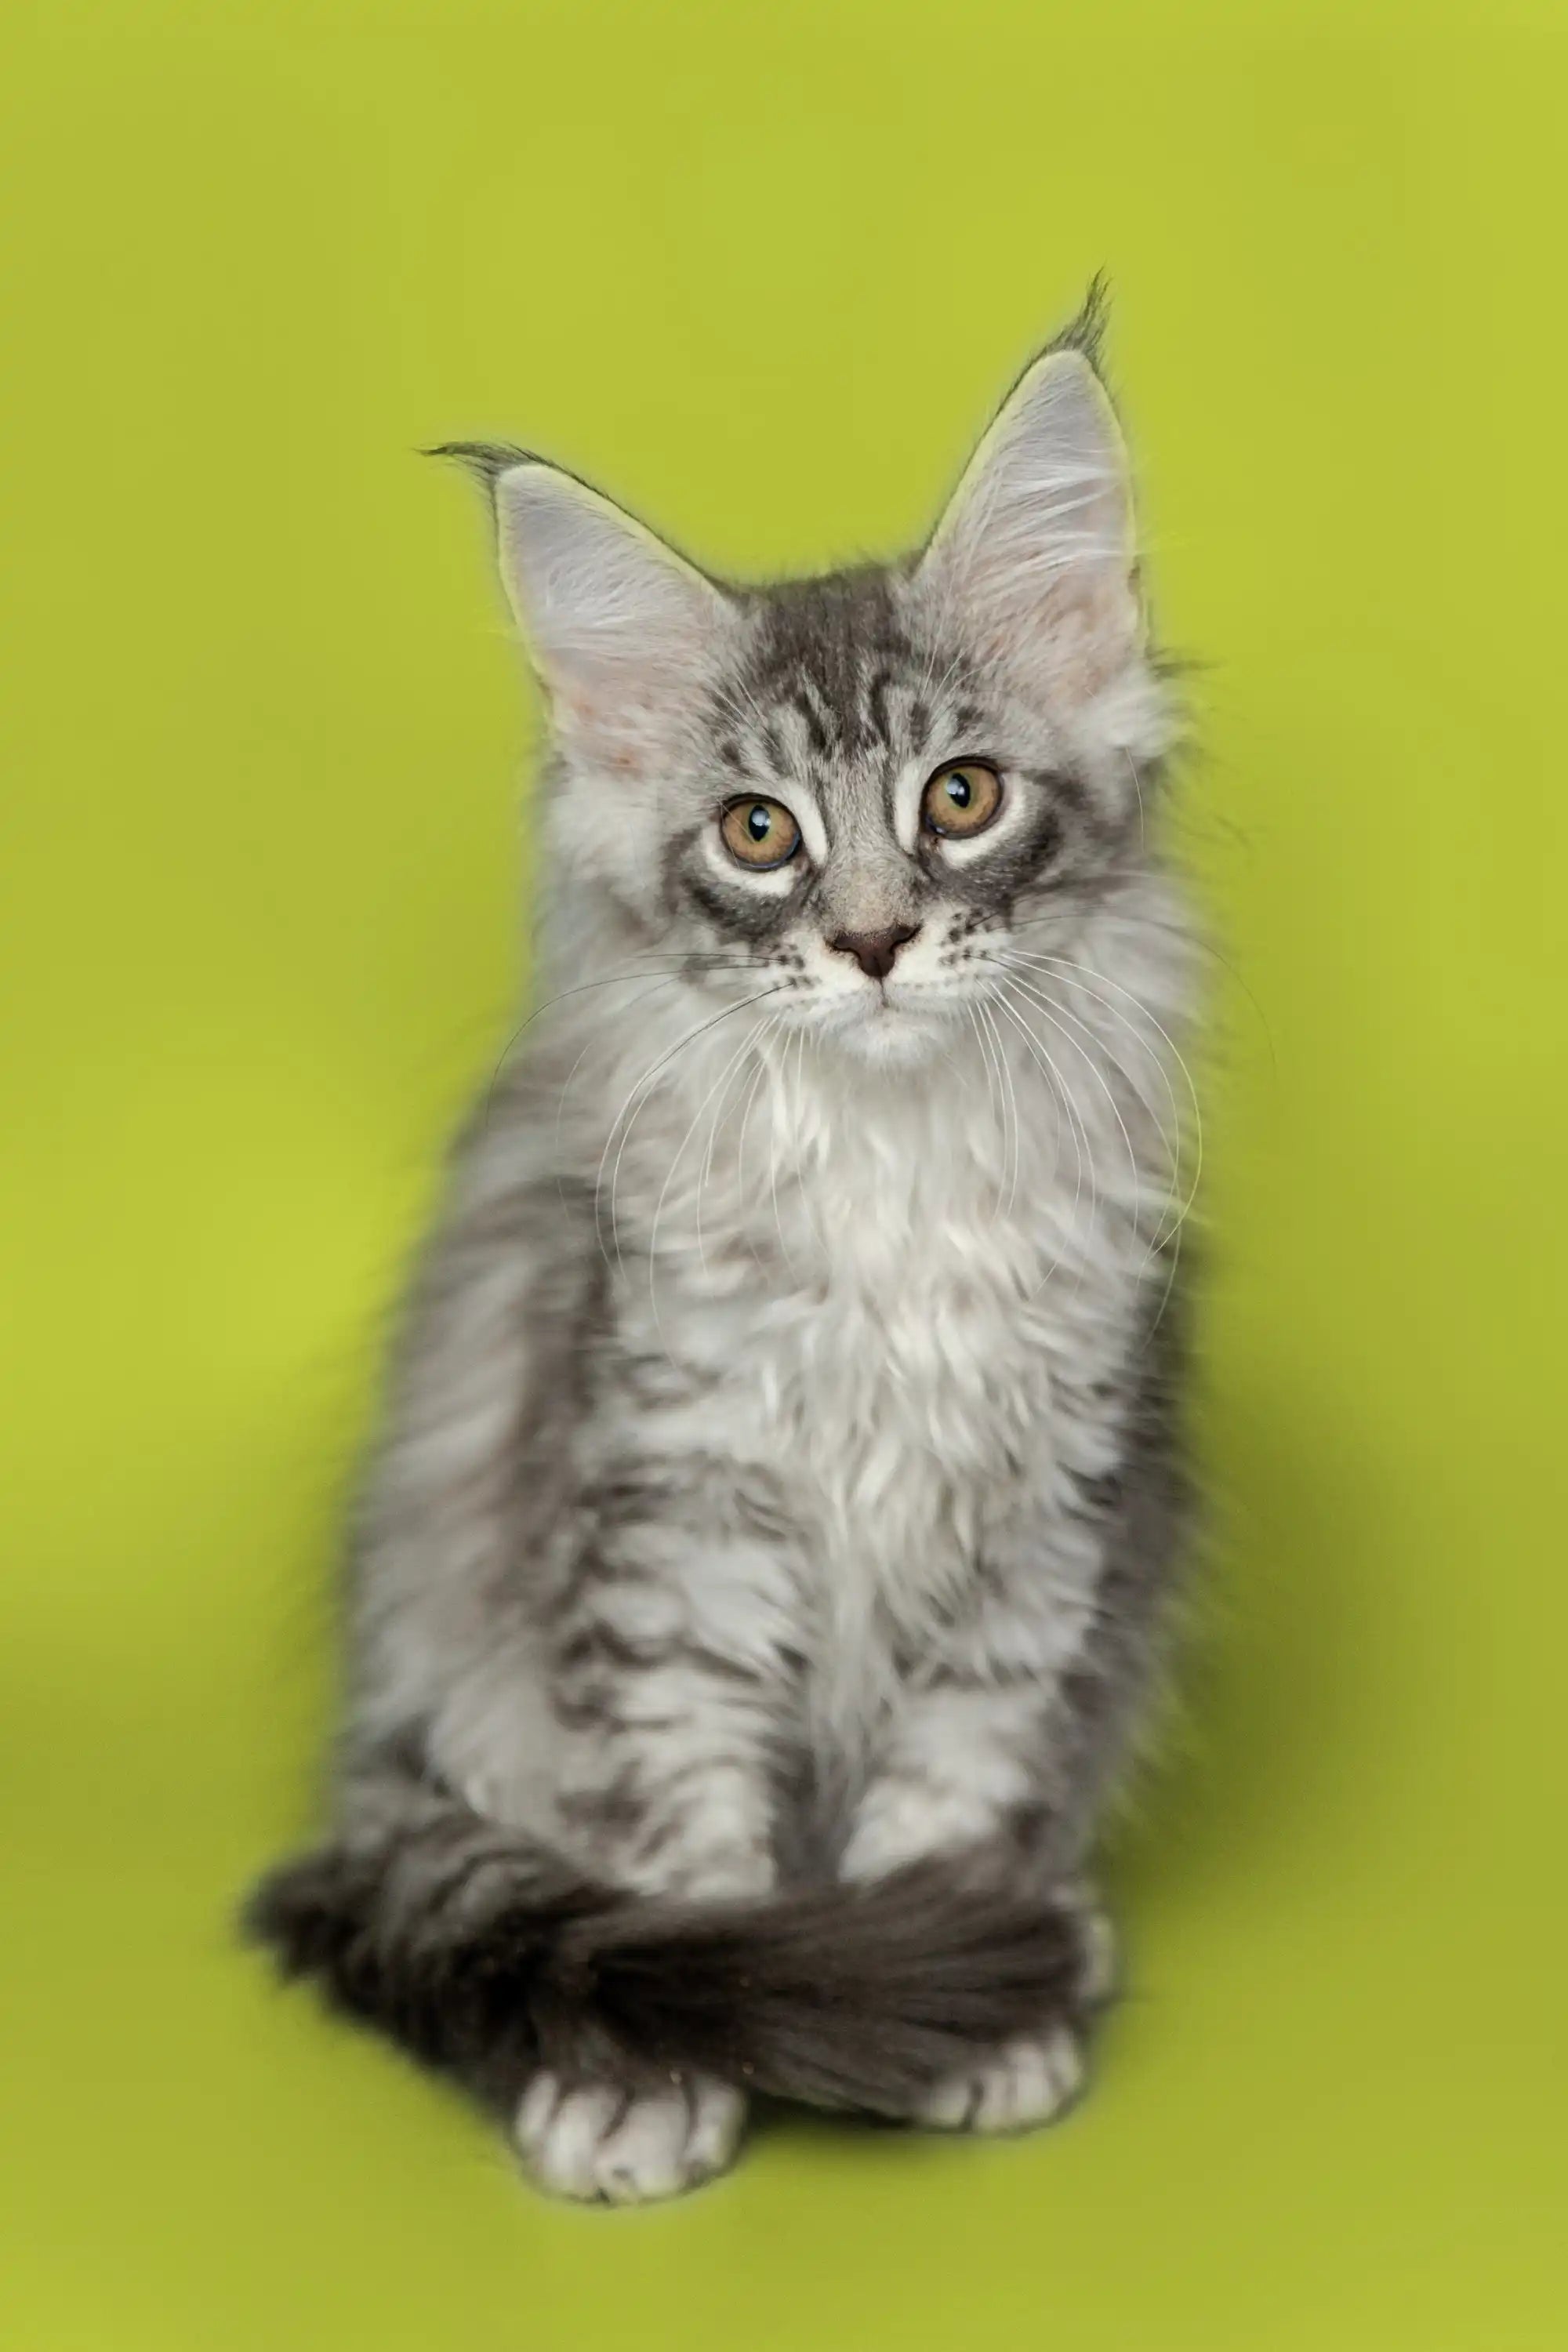 Maine Coon Kittens and Cats for Sale Koda| Kitten